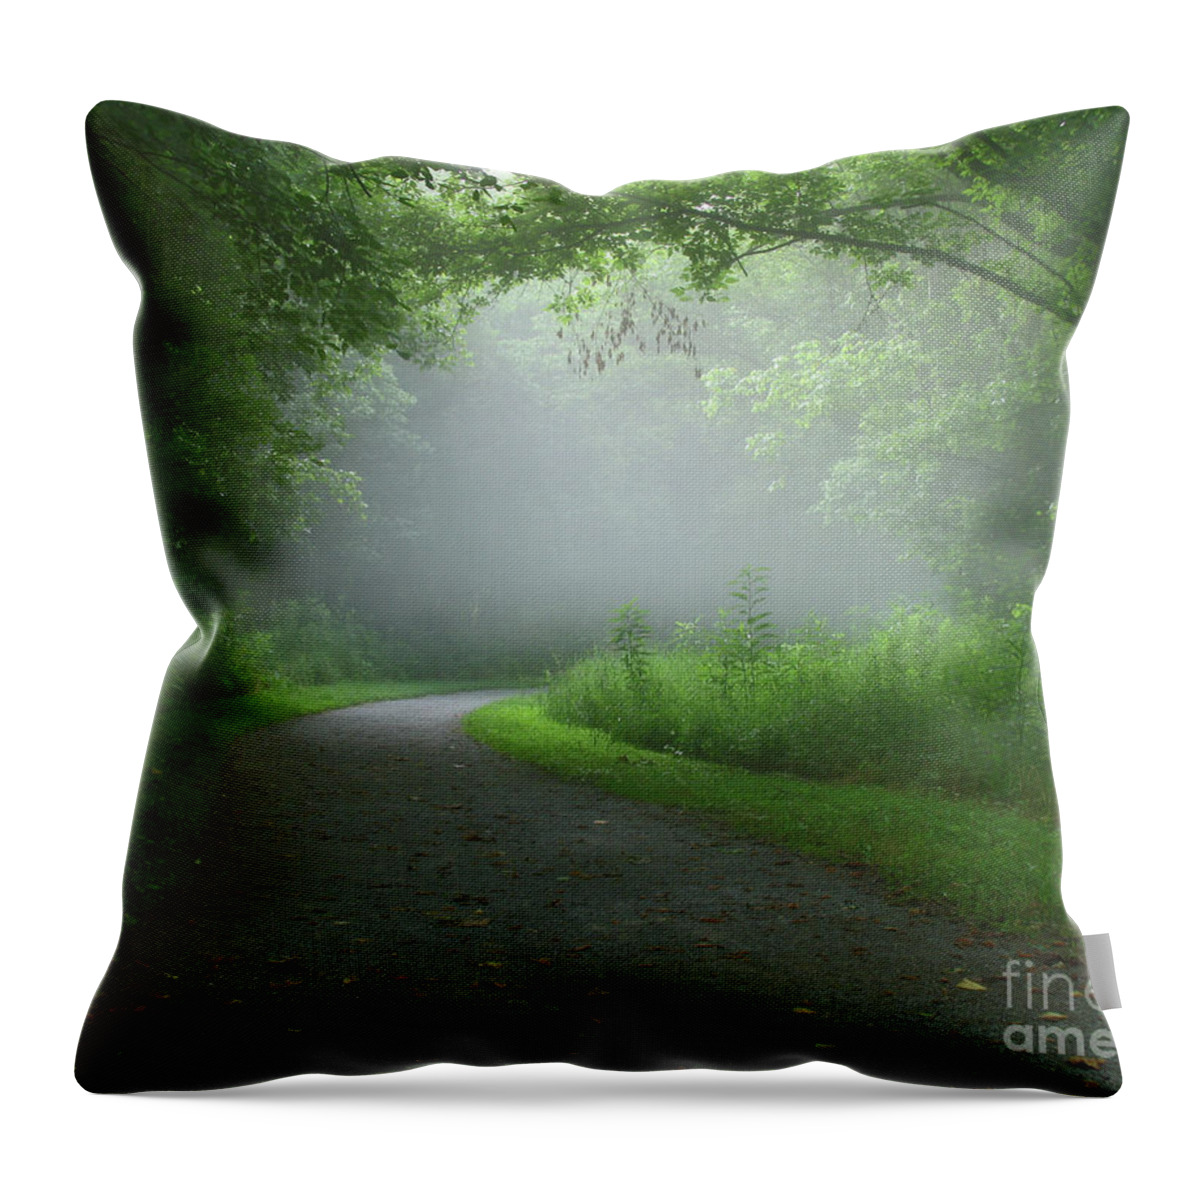 Green Throw Pillow featuring the photograph Mystery Walk by Douglas Stucky